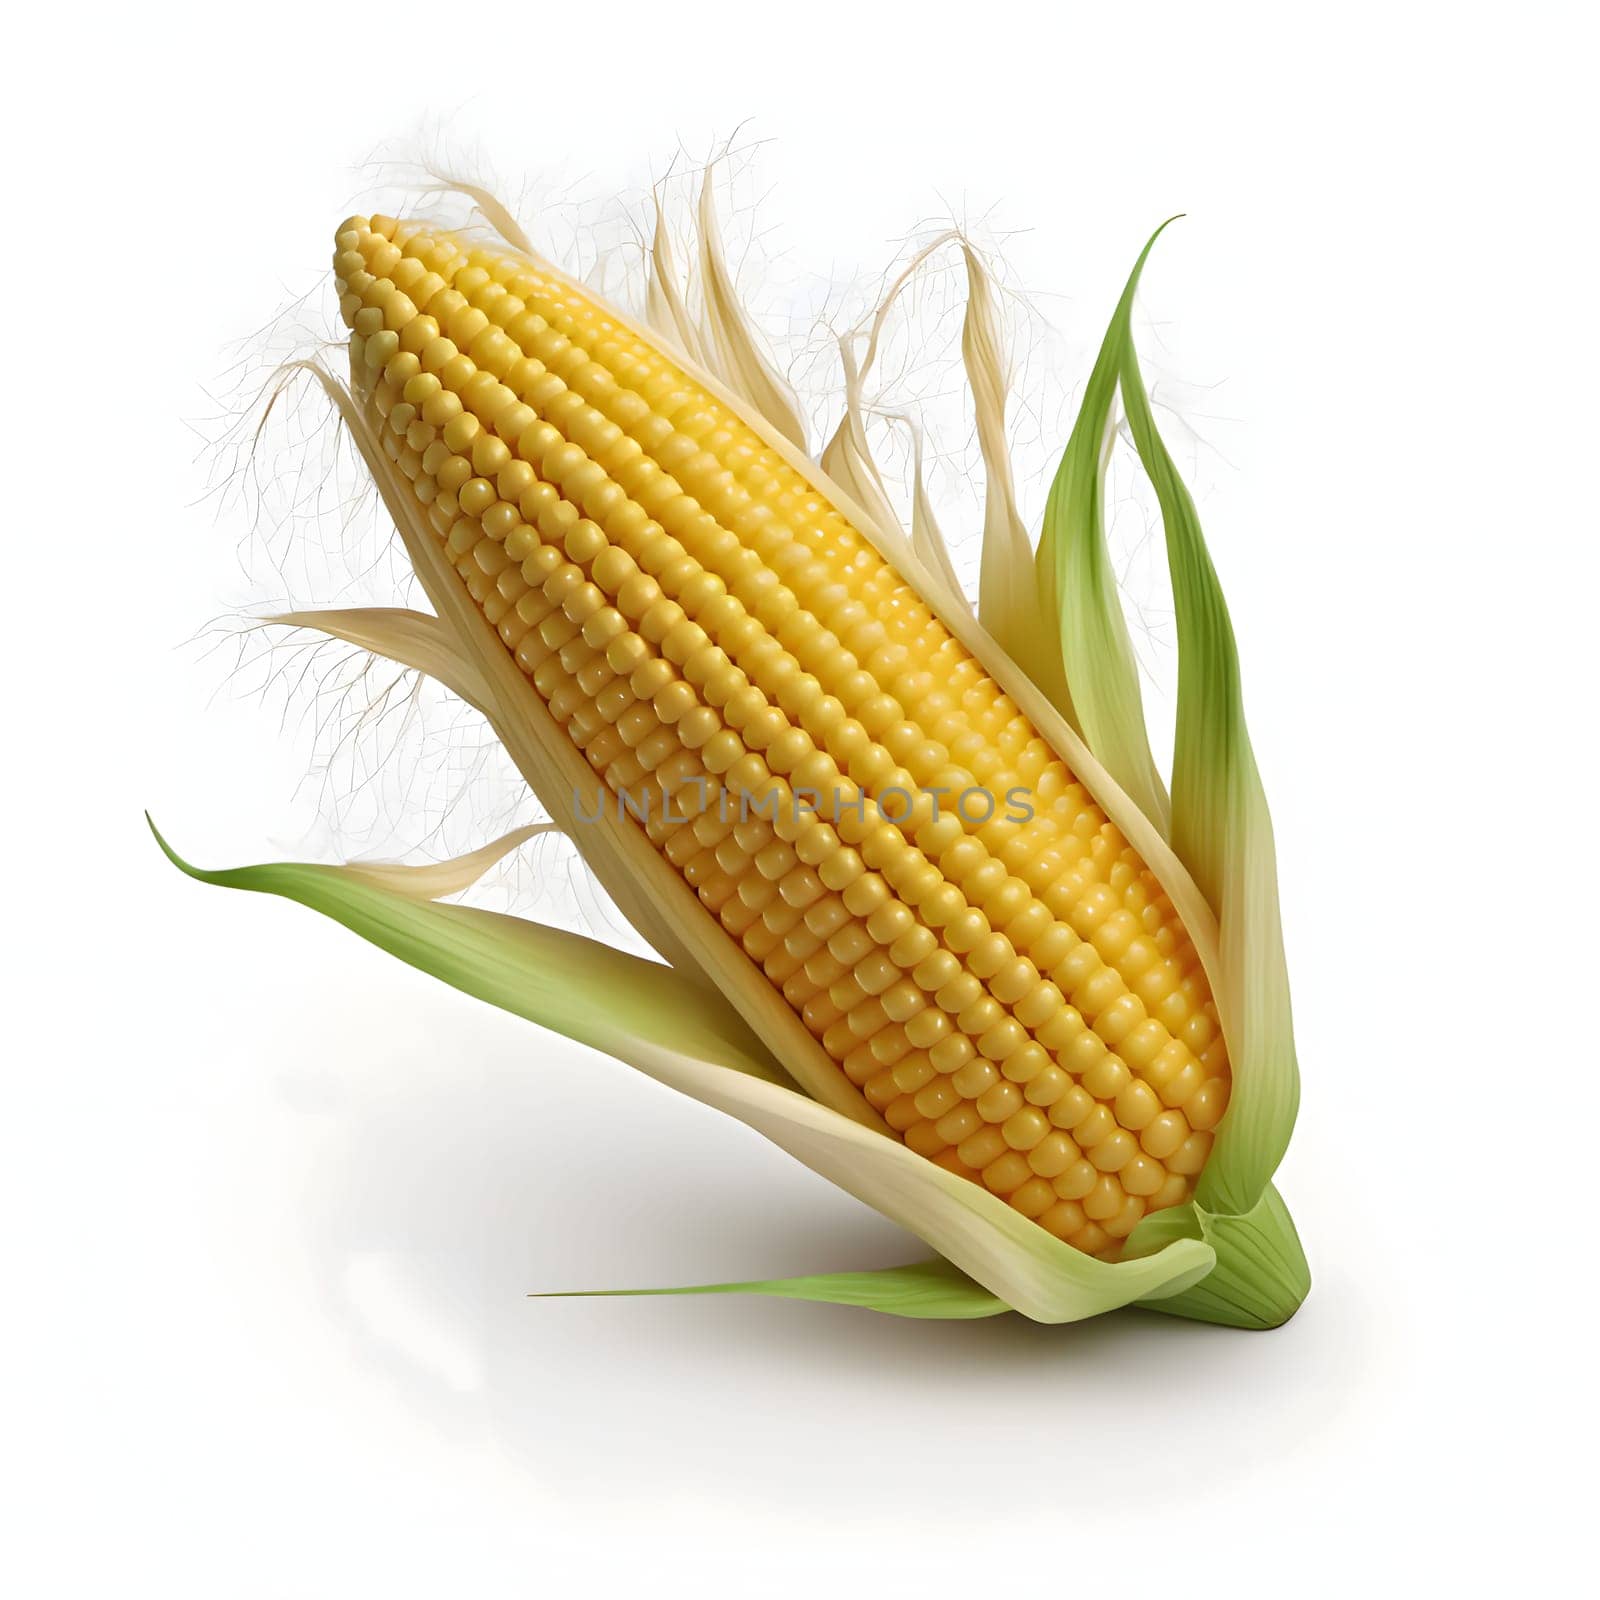 3D illustration of a yellow corn cob in a leaf. Corn as a dish of thanksgiving for the harvest, a picture on a white isolated background. An atmosphere of joy and celebration.